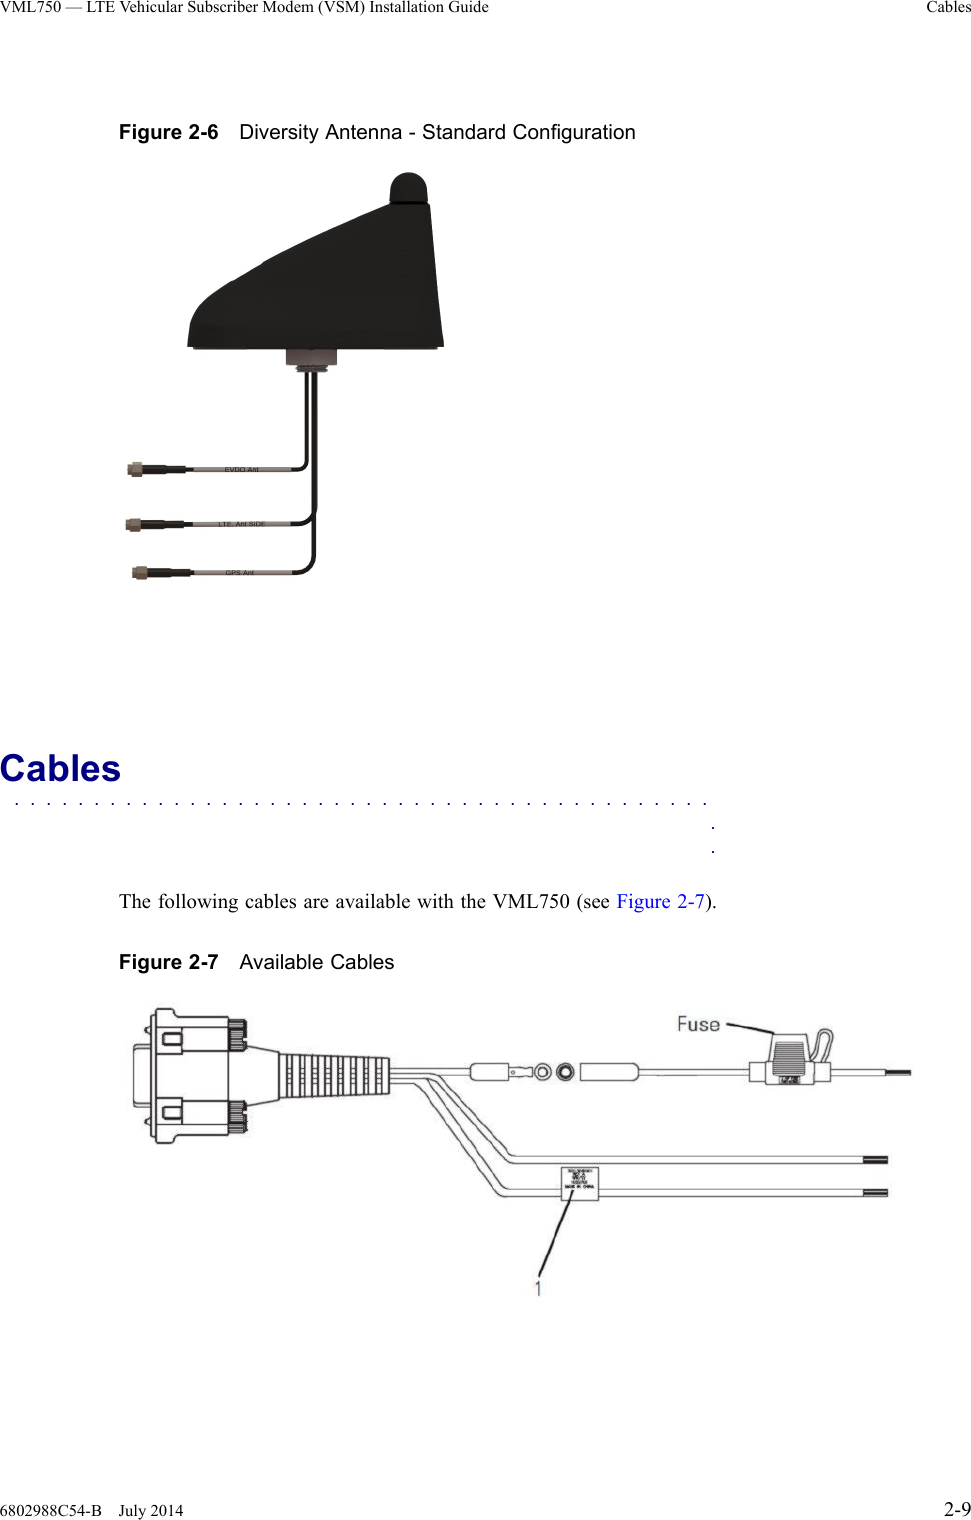 VML750—LTEV ehicularSubscriberModem(VSM)InstallationGuideCablesFigure2-6DiversityAntenna-StandardConfigurationCables■■■■■■■■■■■■■■■■■■■■■■■■■■■■■■■■■■■■■■■■■■■■■■ThefollowingcablesareavailablewiththeVML750(seeFigure2-7).Figure2-7AvailableCables6802988C54-BJuly20142-9